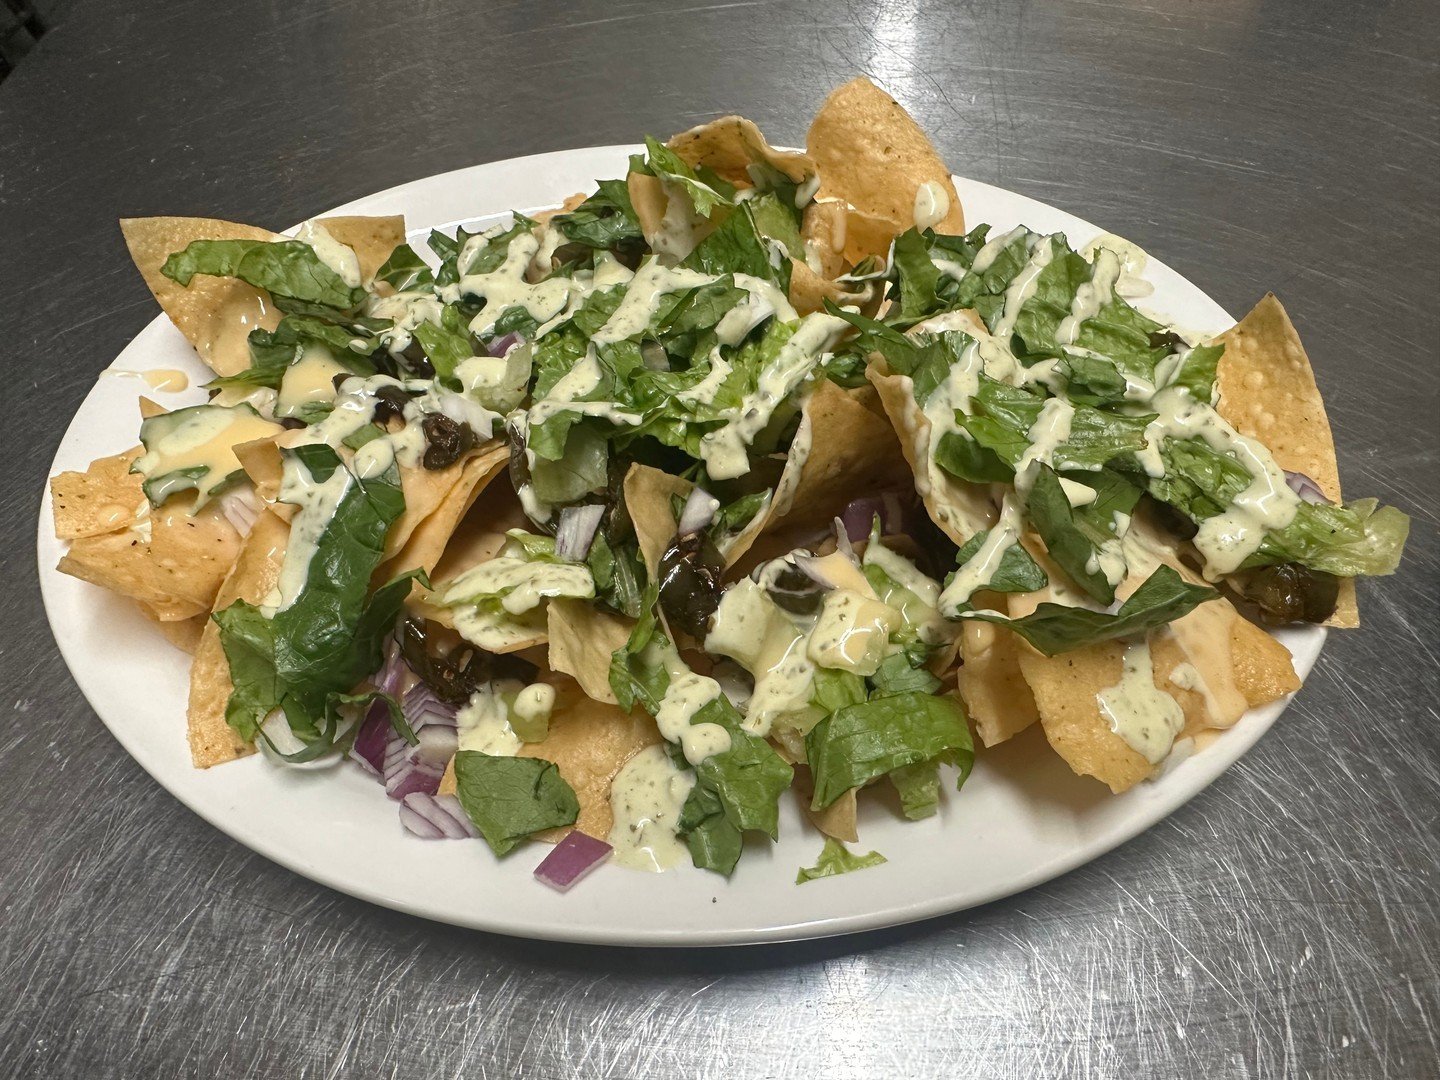 As an homage to your favorite TV chef - Guy Fieri - this is how we think we would describe our nachos - 🔥🌶️ Get ready to IGNITE your taste buds with St. Nick&rsquo;s EPIC Pub Nachos! Dive into a mountain of crunchy corn tortilla chips smothered in 